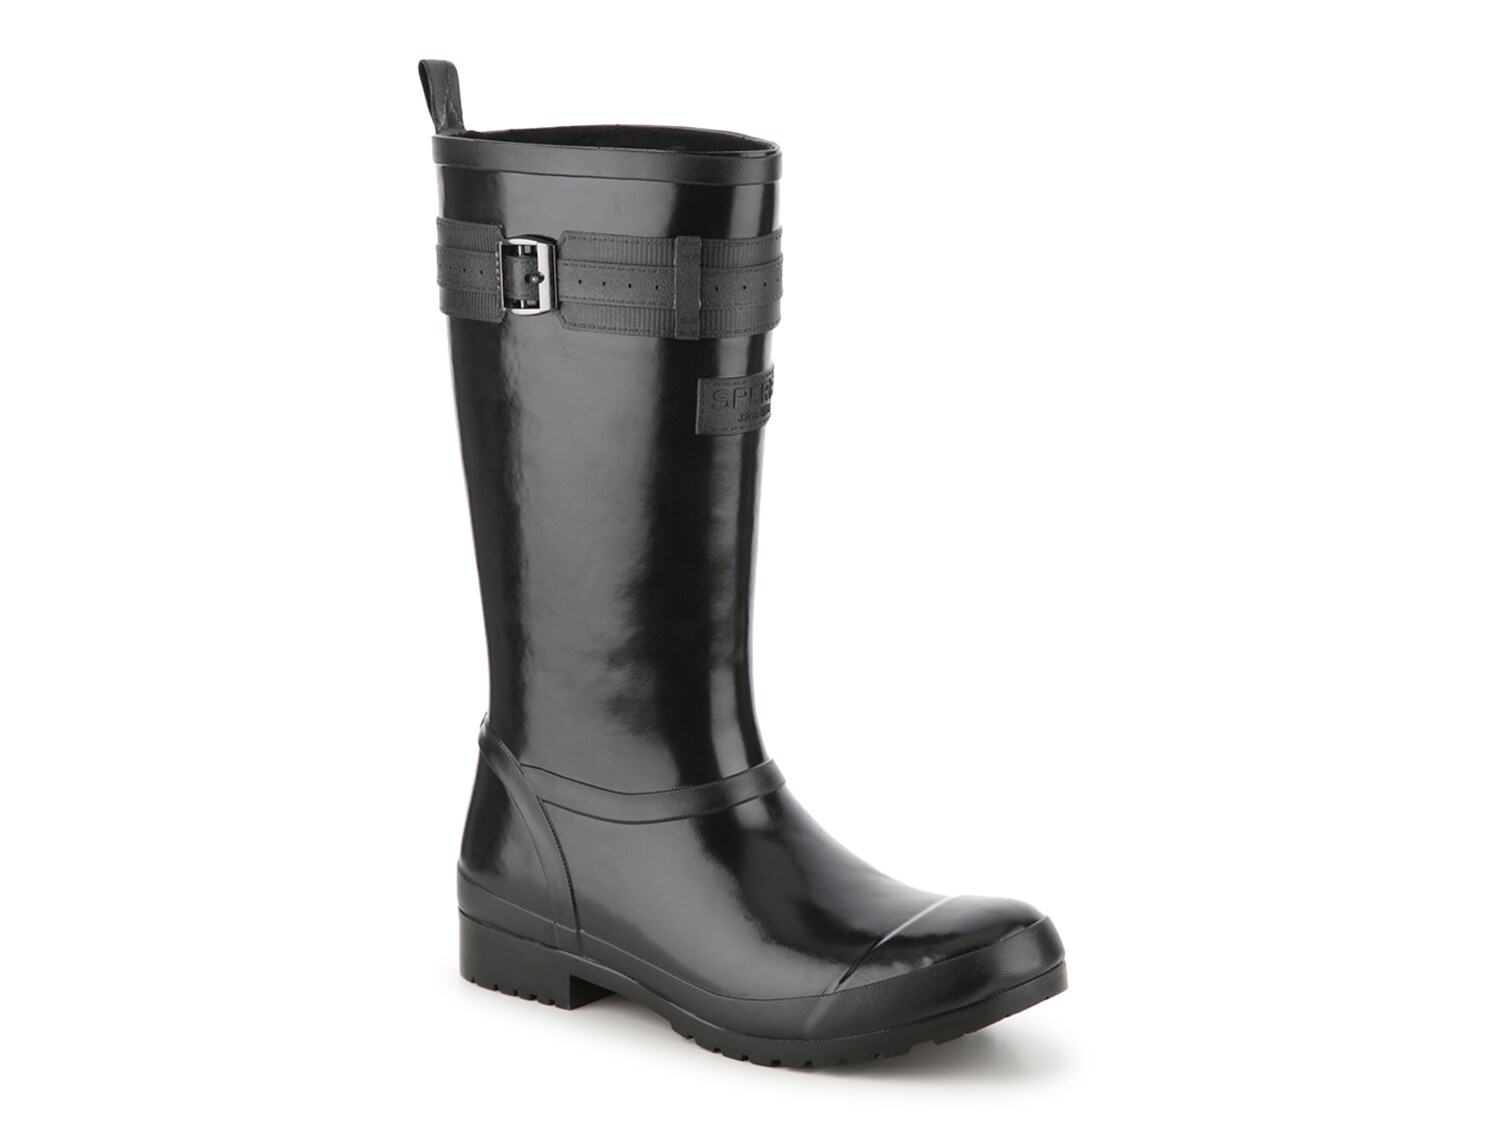 sperry rain boots clearance